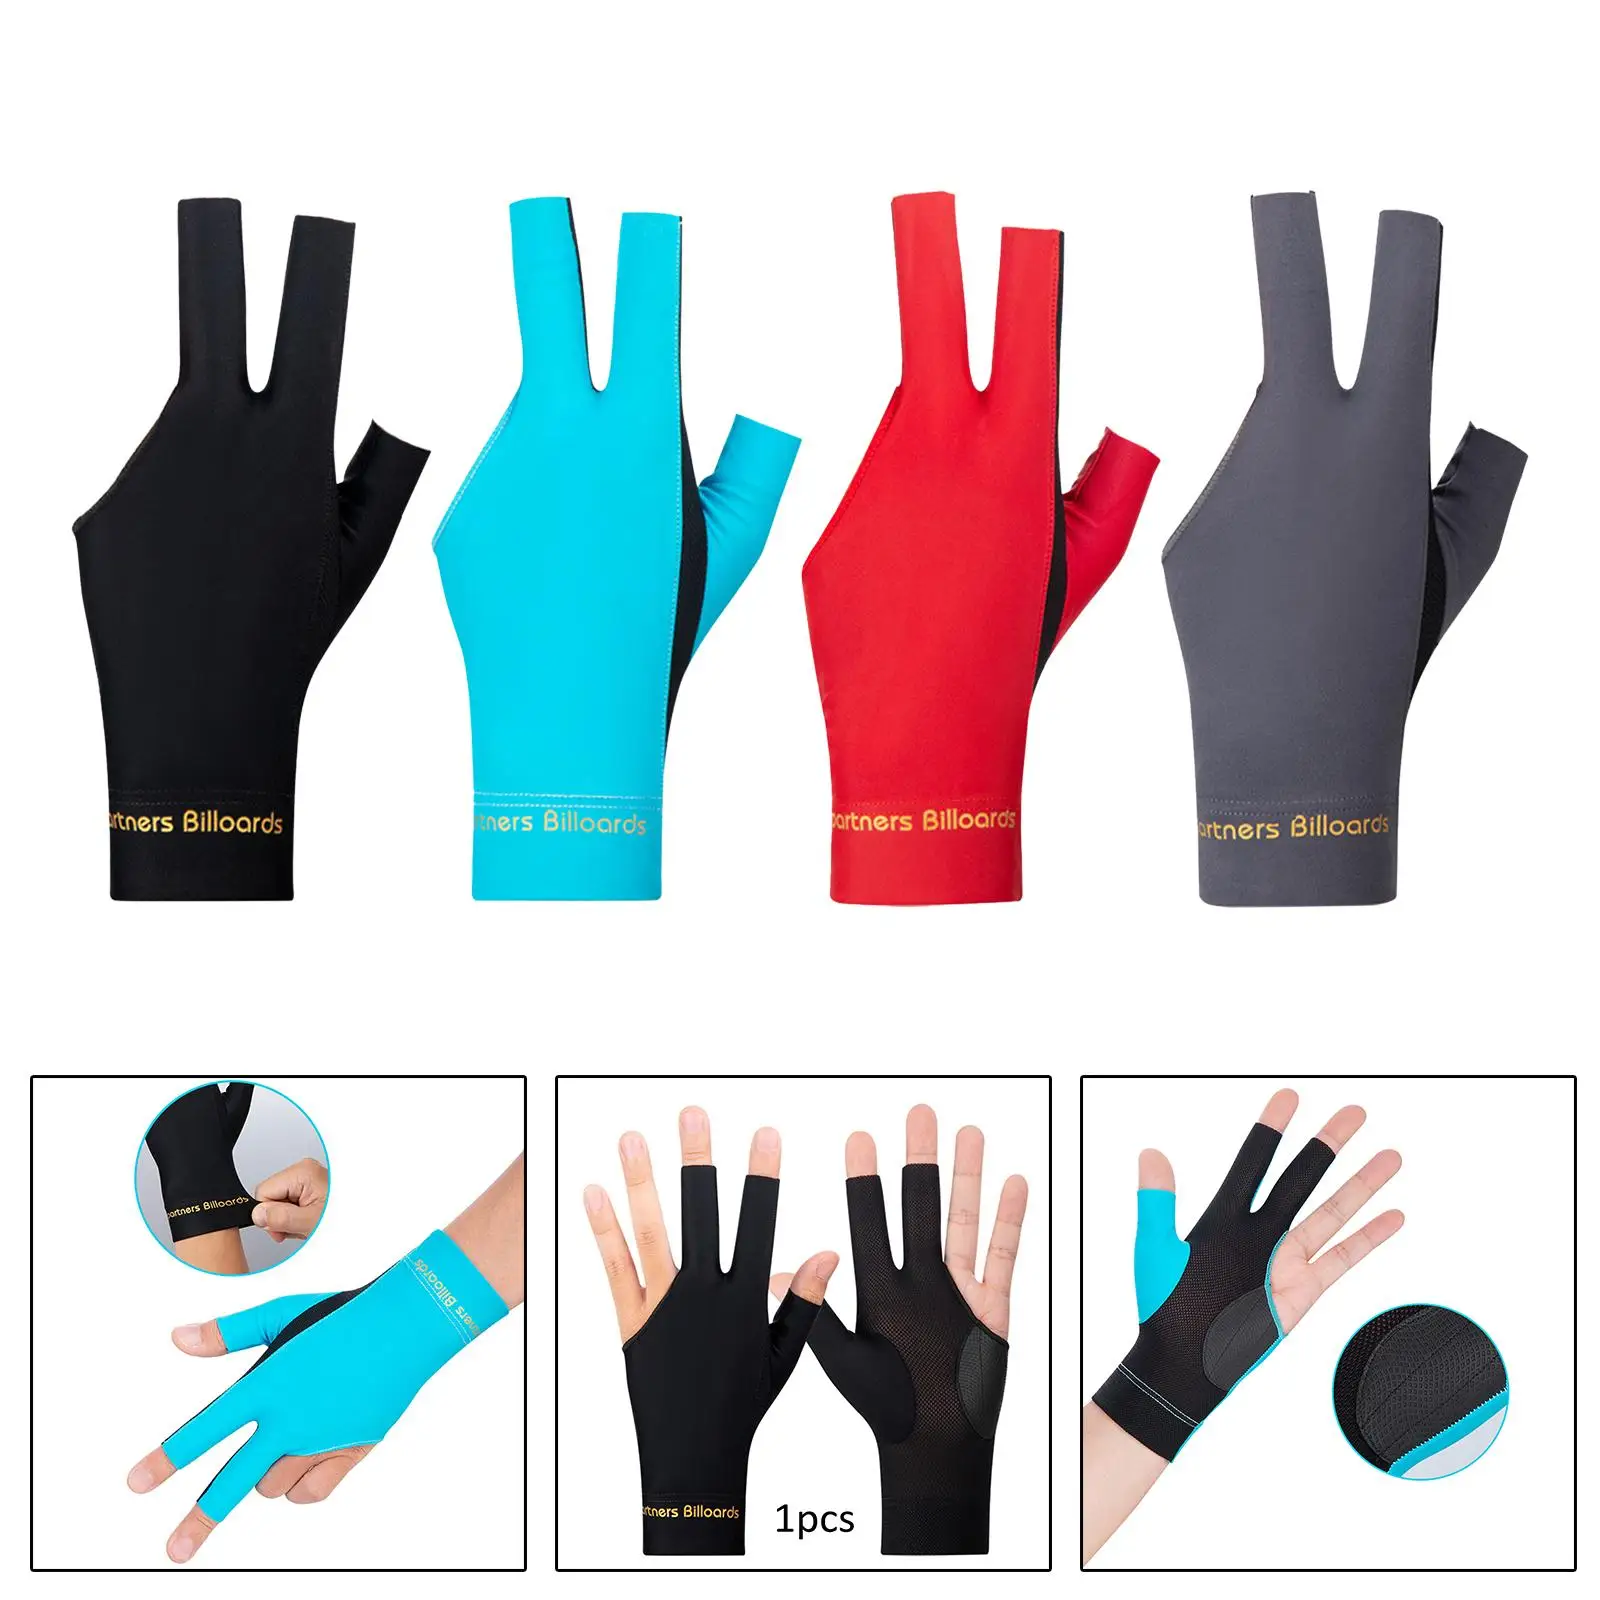 3 Fingers Billiard Gloves Professional Match Gloves Accessories Left Hand Breathable Show Gloves Pool Cue Mitts for Sport Women